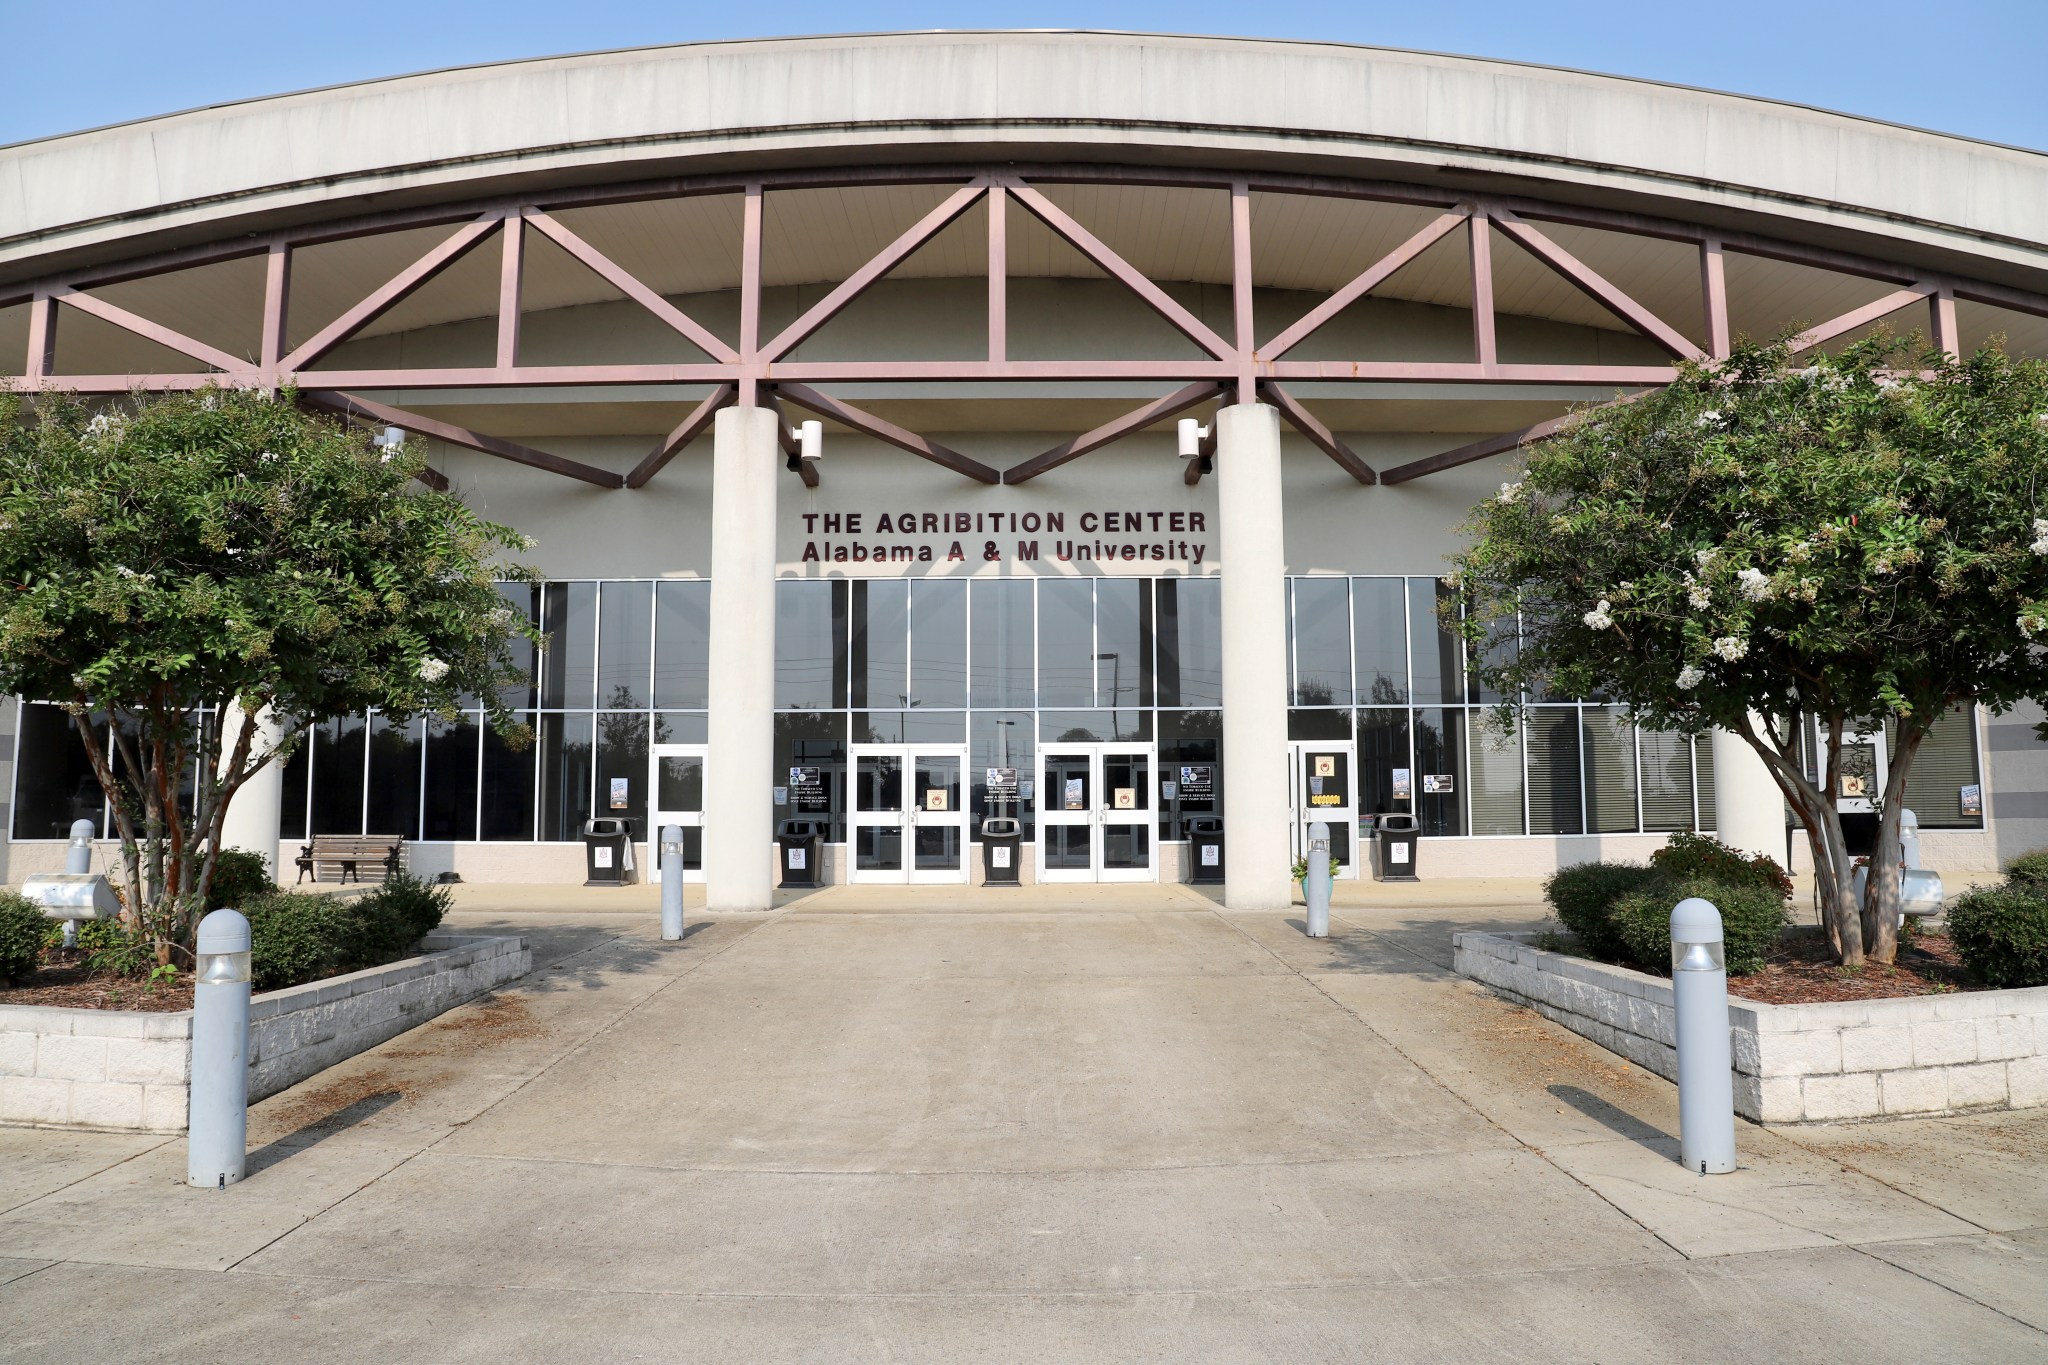 An external image of the Alabama A&M University Agribition Center from the front facade. The Center is a cream-colored stone building with a curved roof, floor-to-ceiling windows, and concrete steps that lead to a covered awning, framed by deep-red structural beams above. Shrubs and crepe myrtle trees frame the foreground and steps leading up to the building. Photo courtesy of AAMU Extension